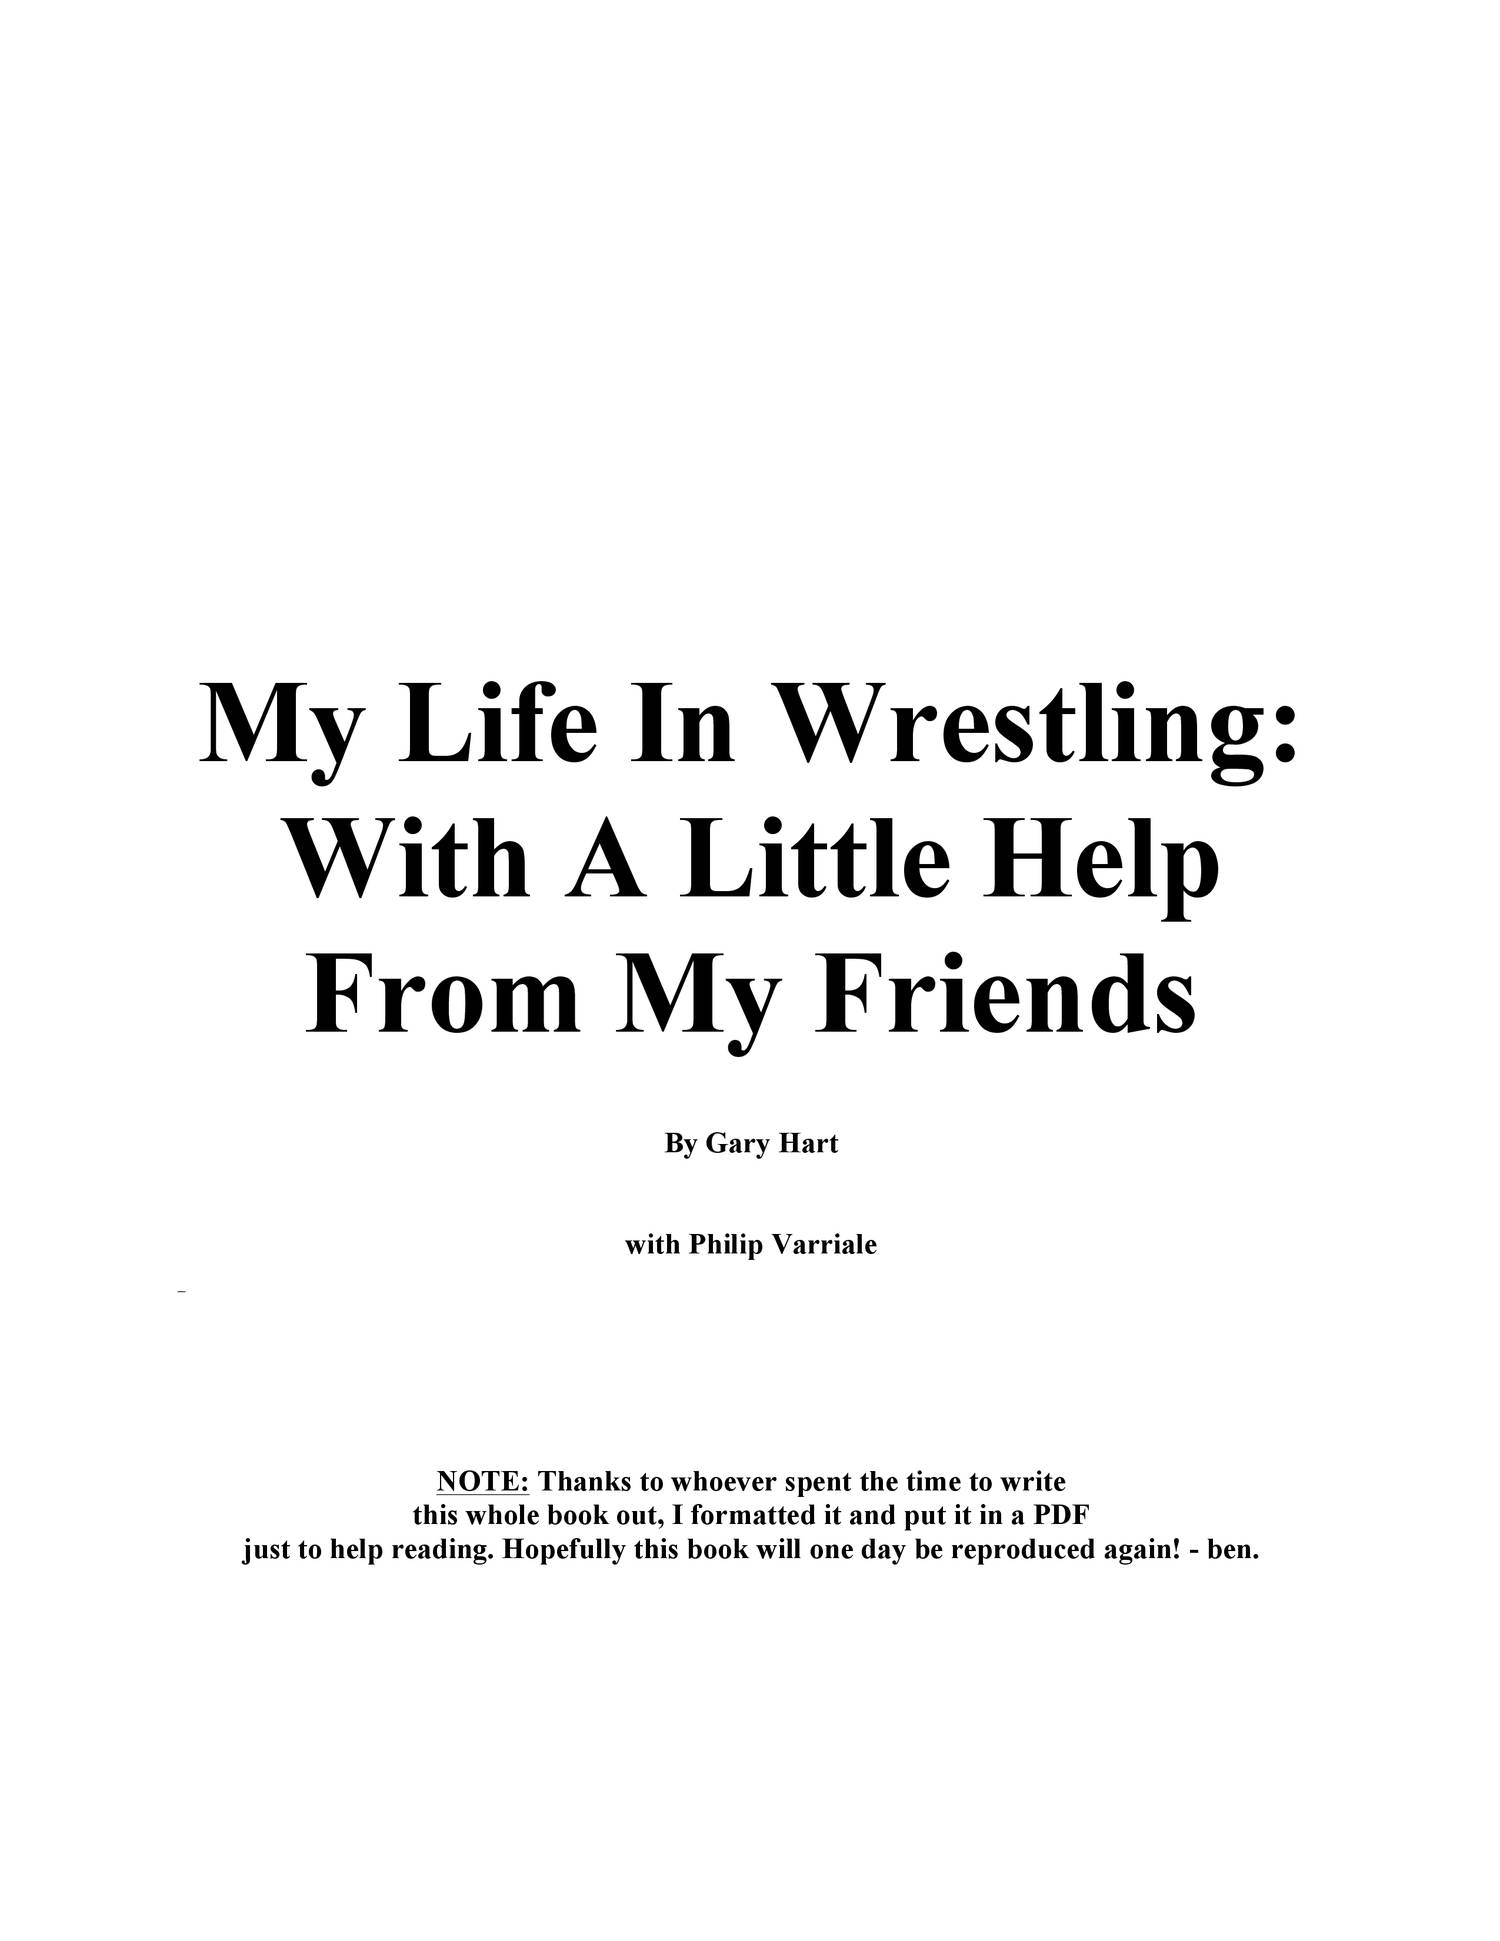 my life in wrestling - with a little help from my friends.pdf - docdroid